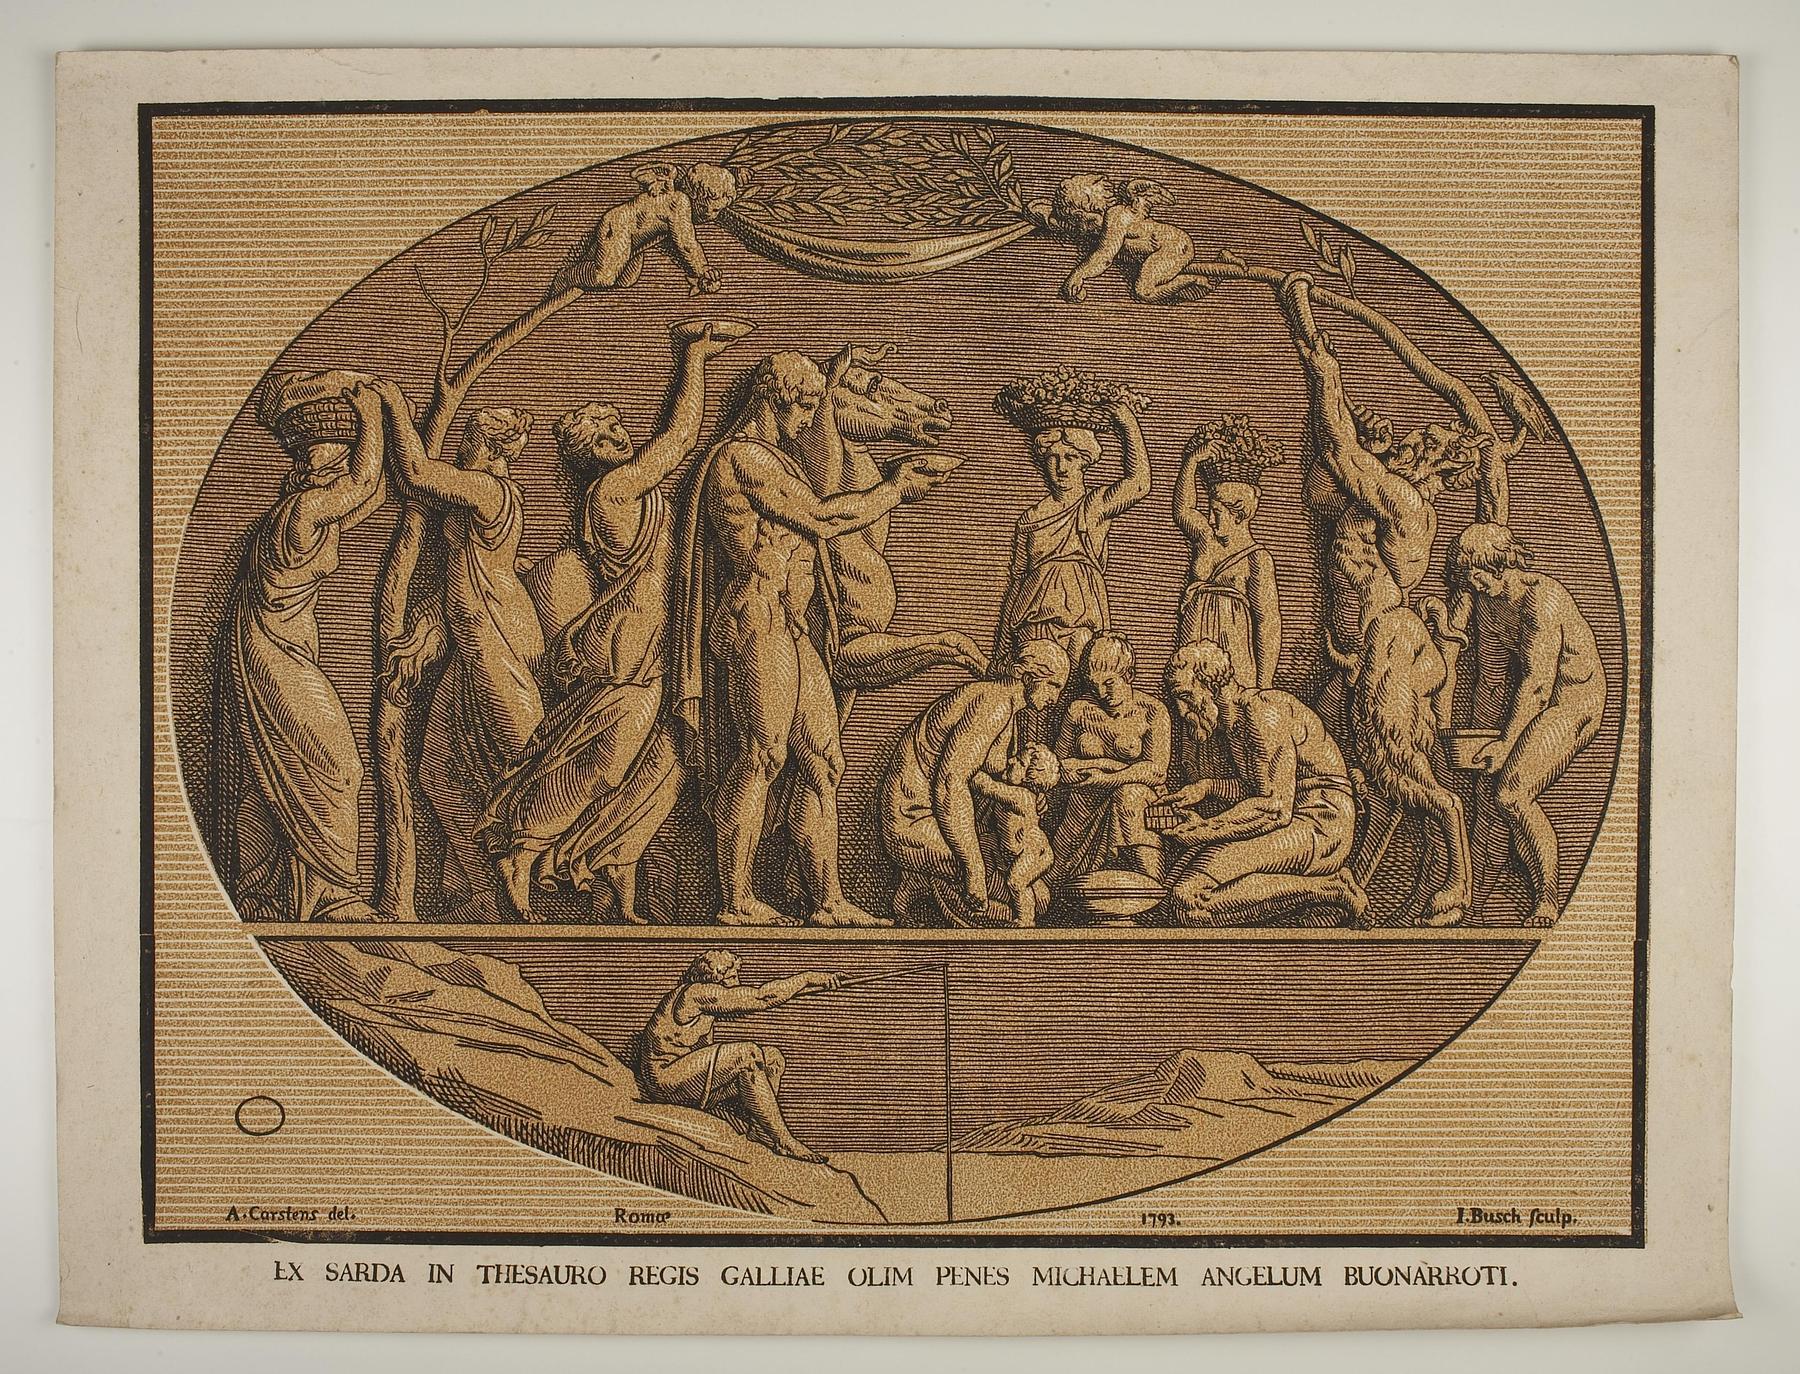 Bacchanalia, also known as "Michelangelo's signet ring", E1487